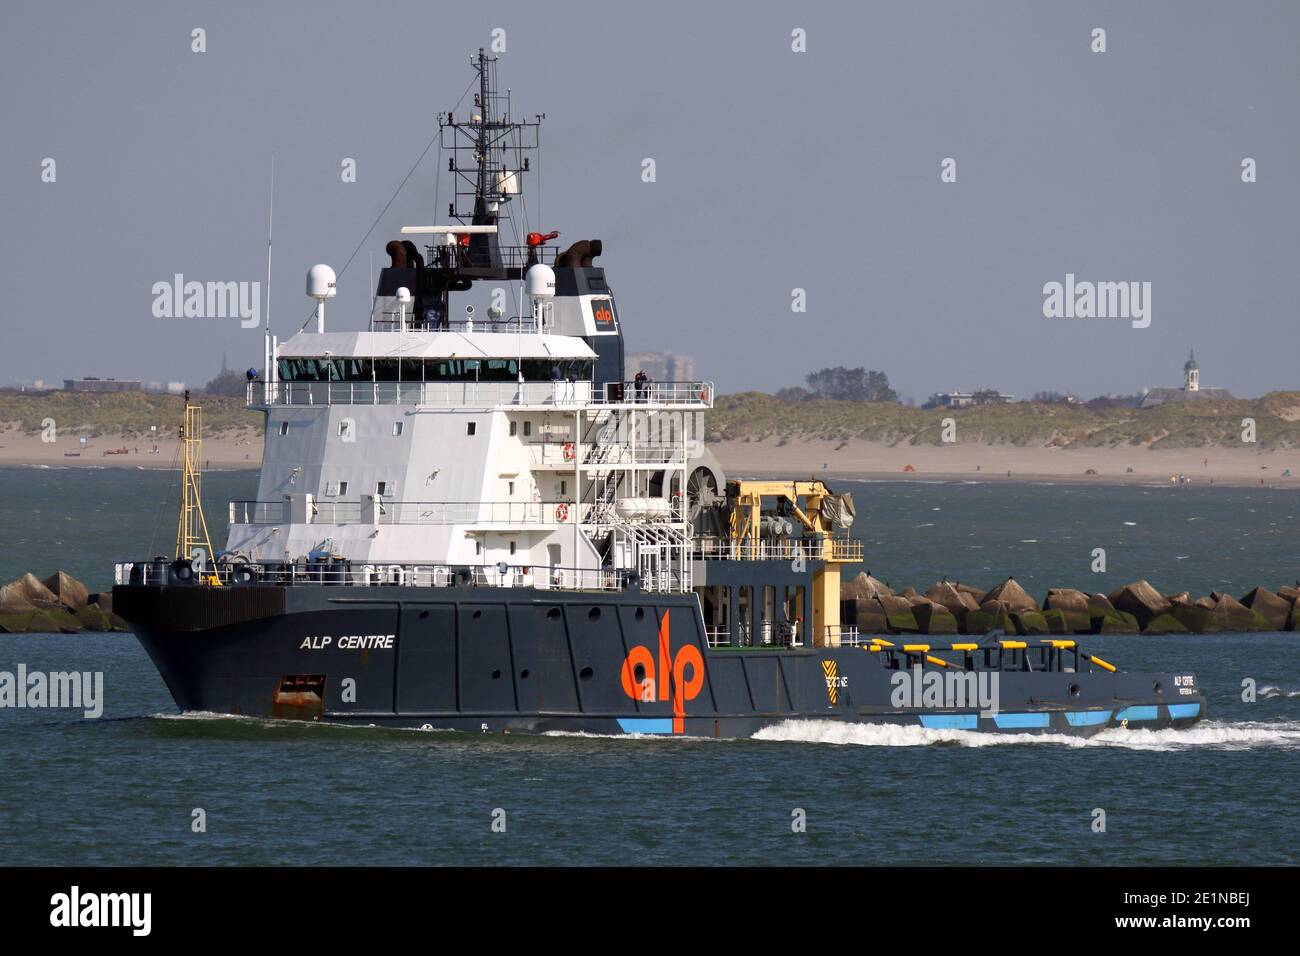 The large offshore tug ALP Centre will leave the port of Rotterdam on September 18, 2020. Stock Photo